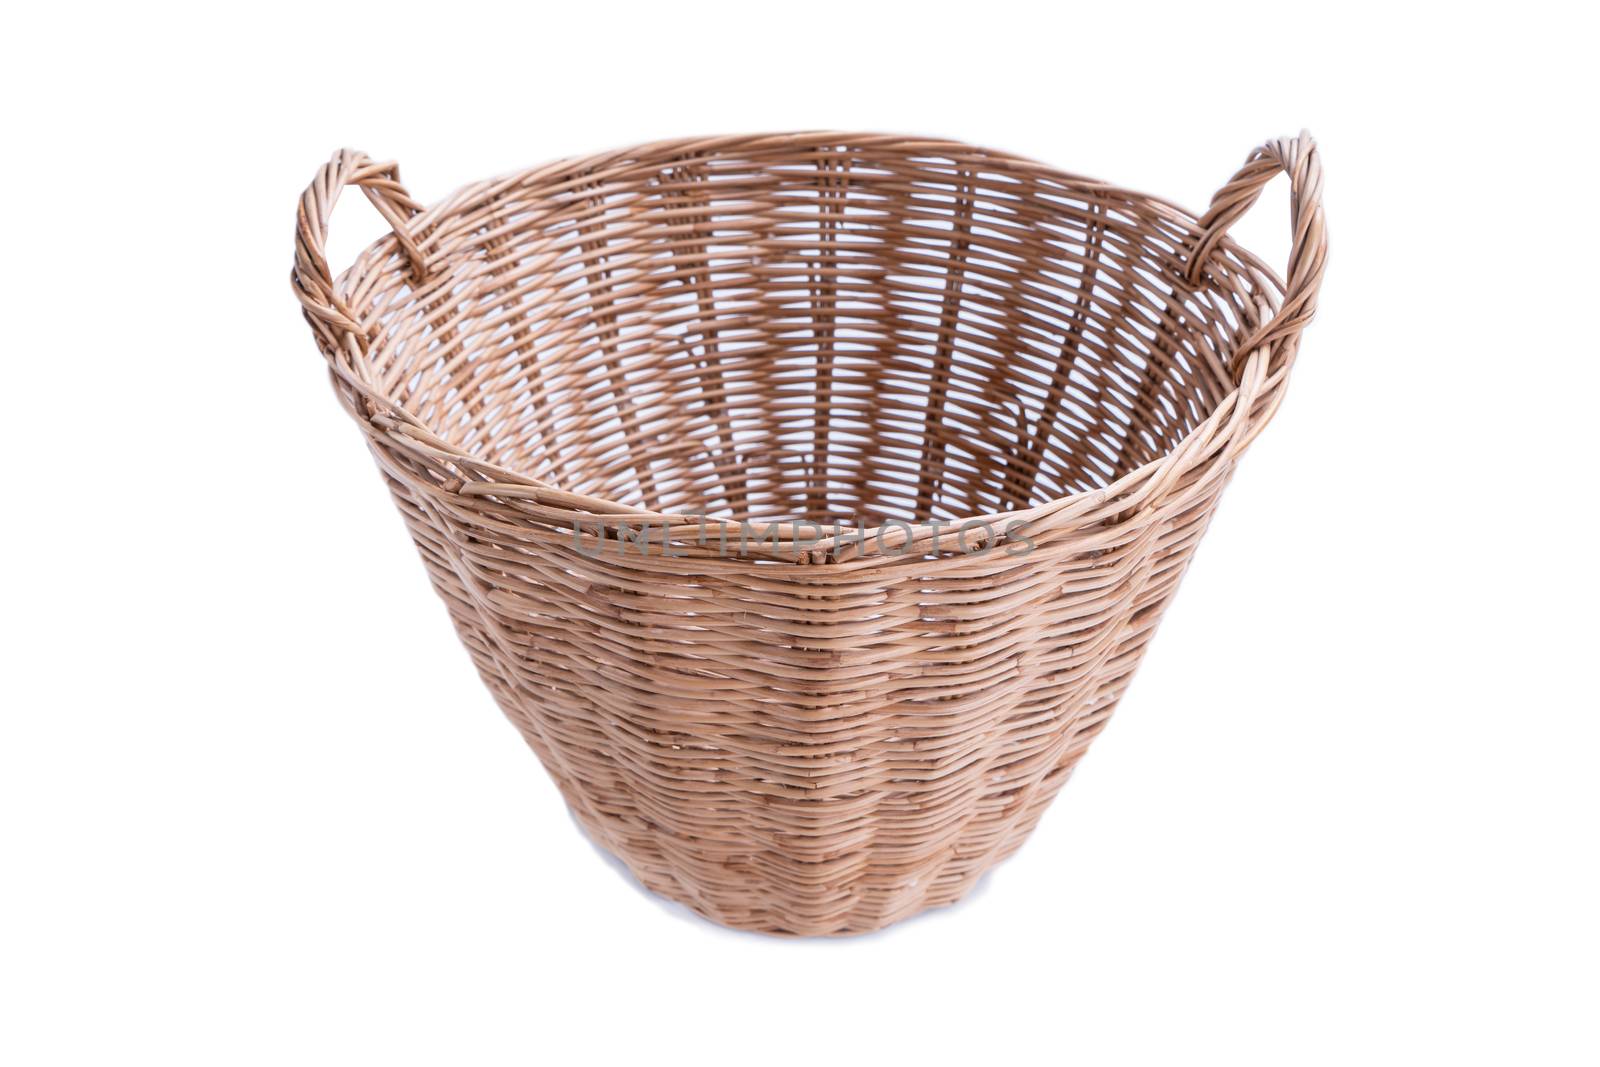 Empty wicker basket with clipping paths isolated on white backgr by Buttus_casso